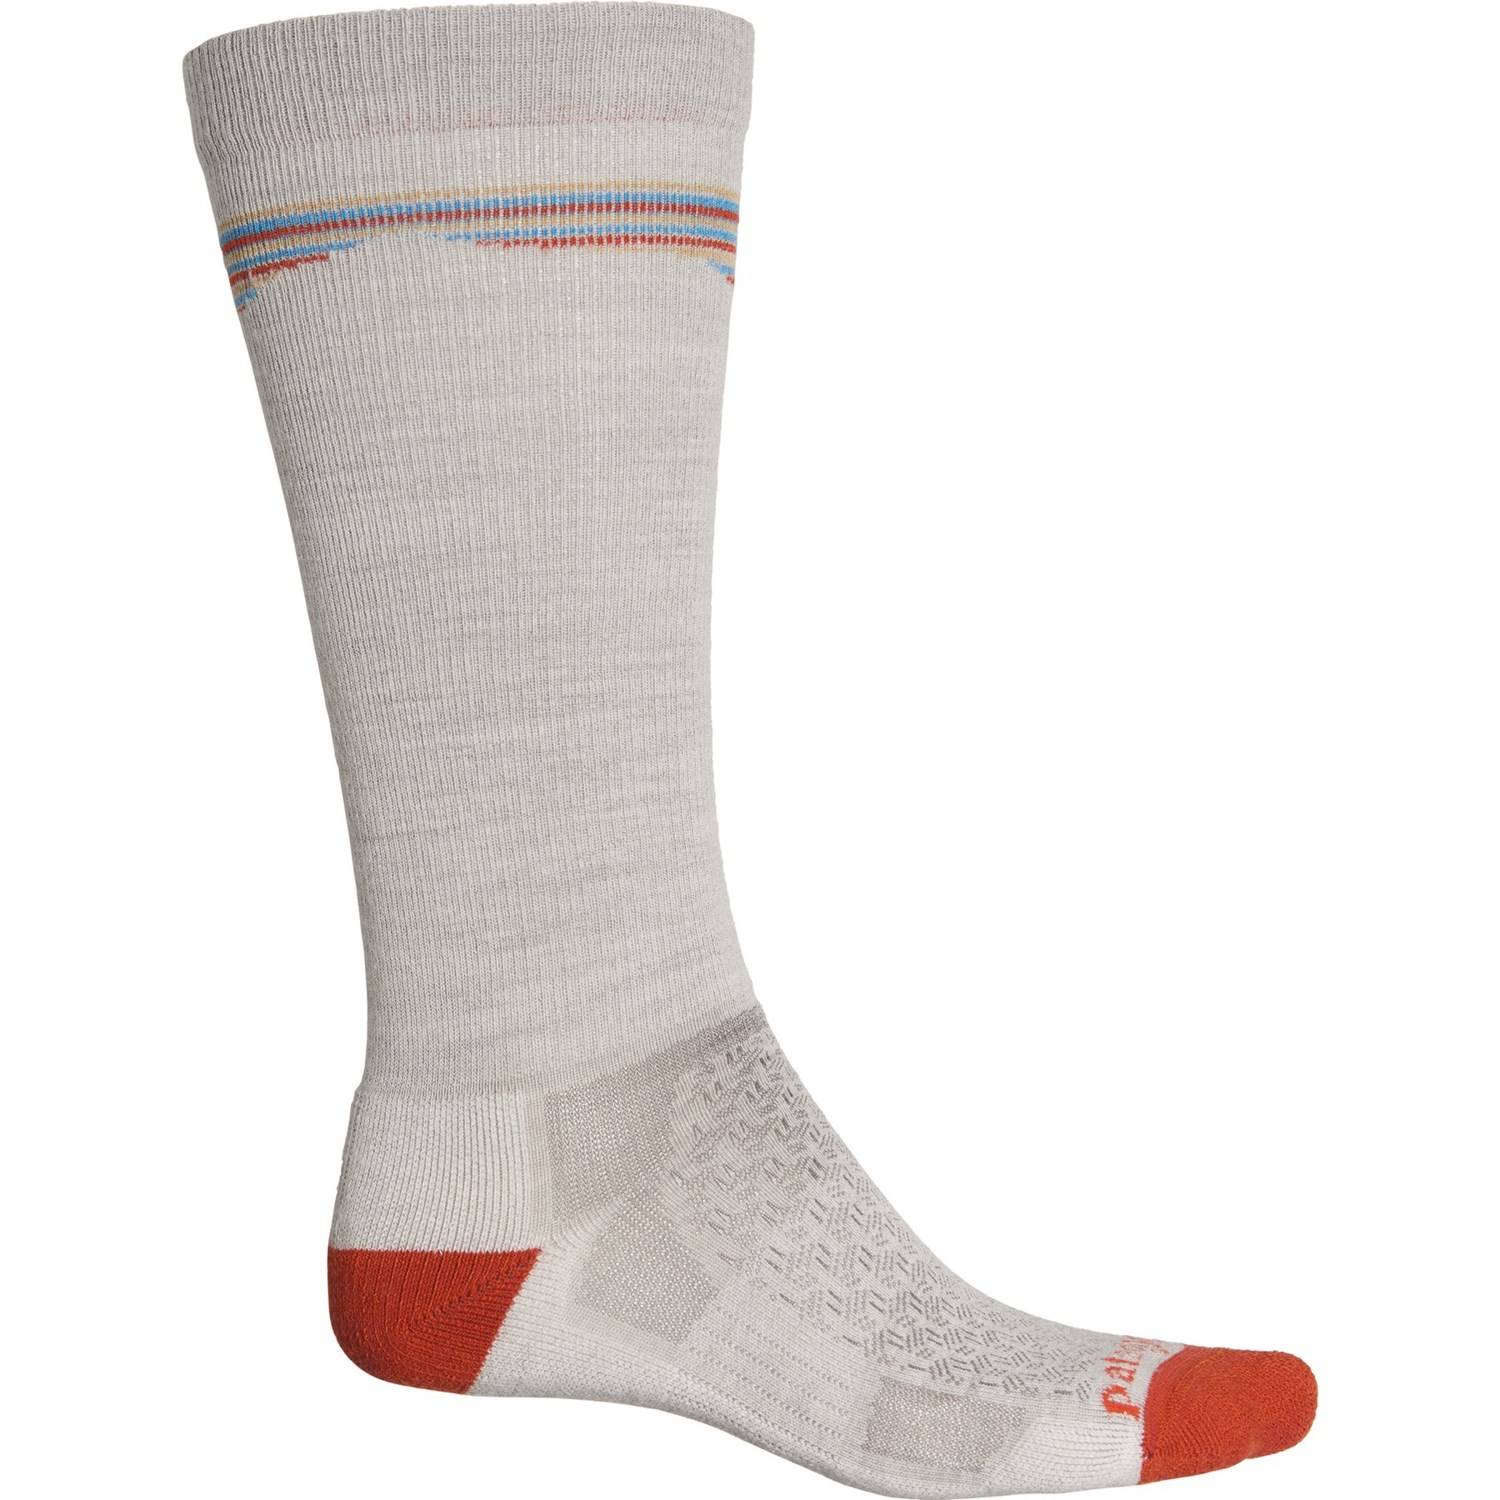 Patagonia High-Performance Socks - Merino Wool, Over the Calf (For Men and Women)